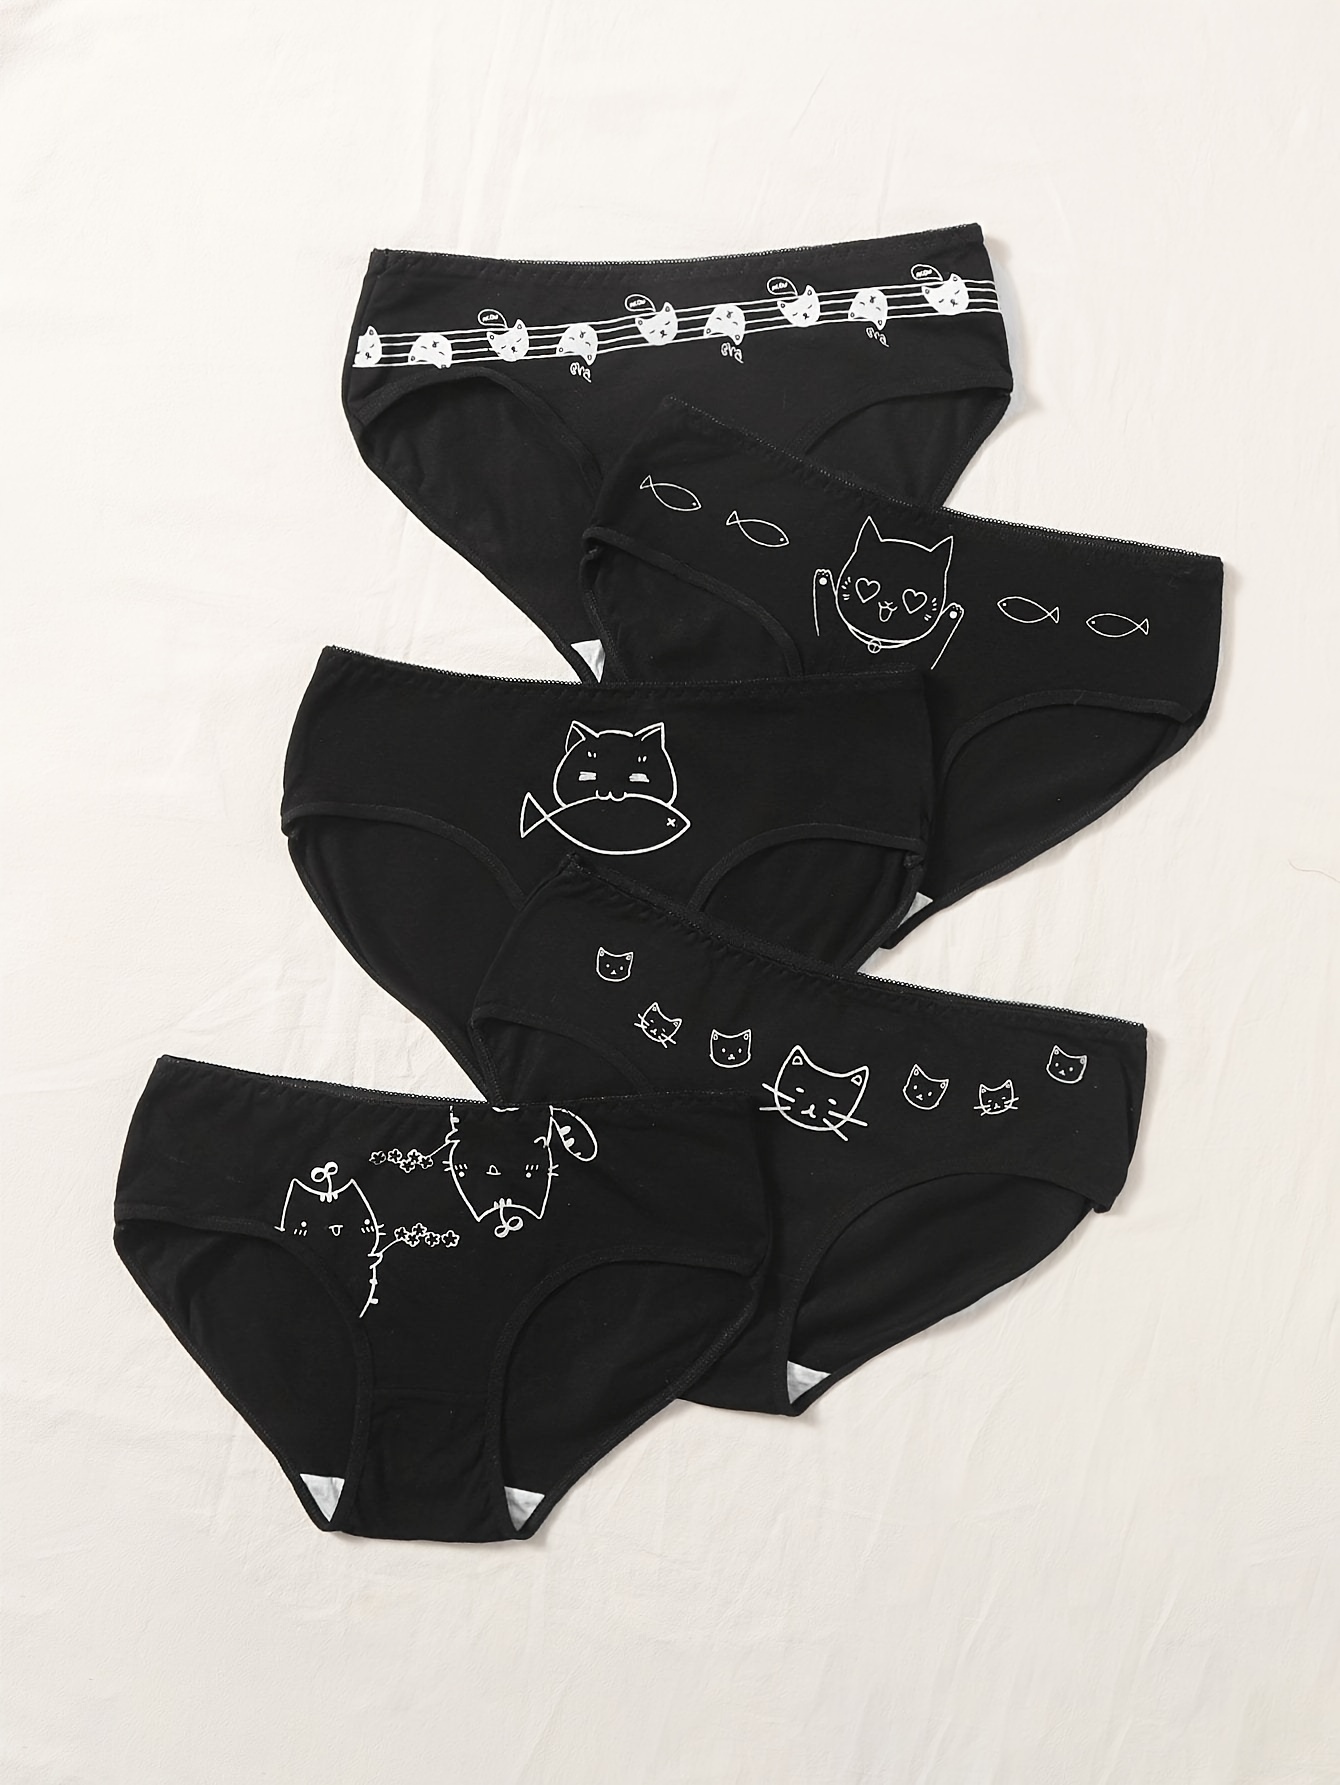 5Pcs/lot High Quality Women's Underwear Cotton Inner File Cartoon Black and  White Cat Triangle Panties Briefs Girl Sexy Lingerie - AliExpress